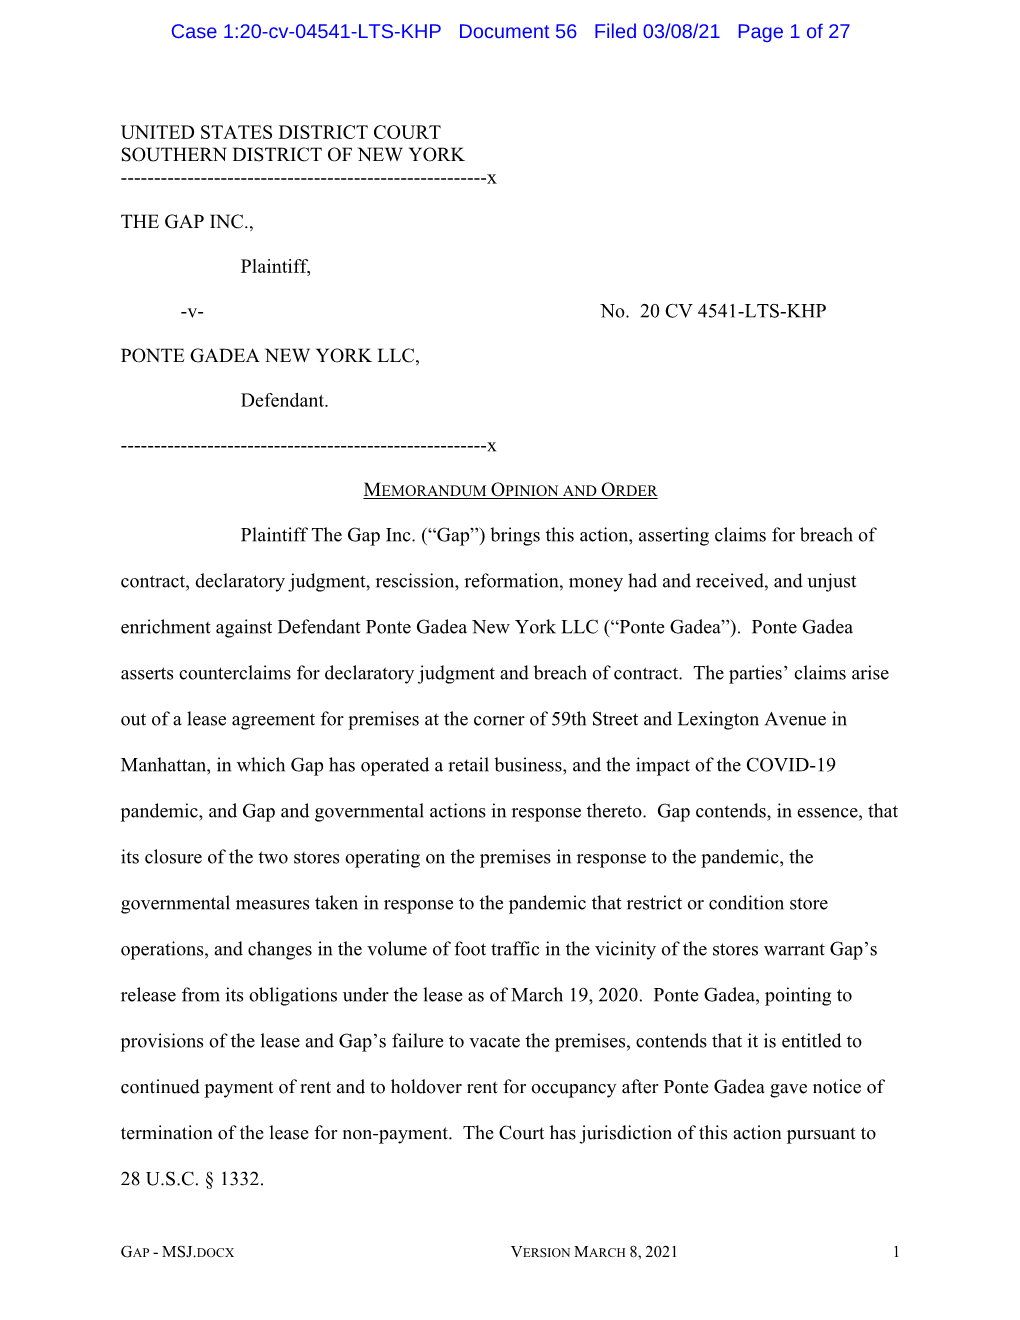 Case 1:20-Cv-04541-LTS-KHP Document 56 Filed 03/08/21 Page 1 of 27